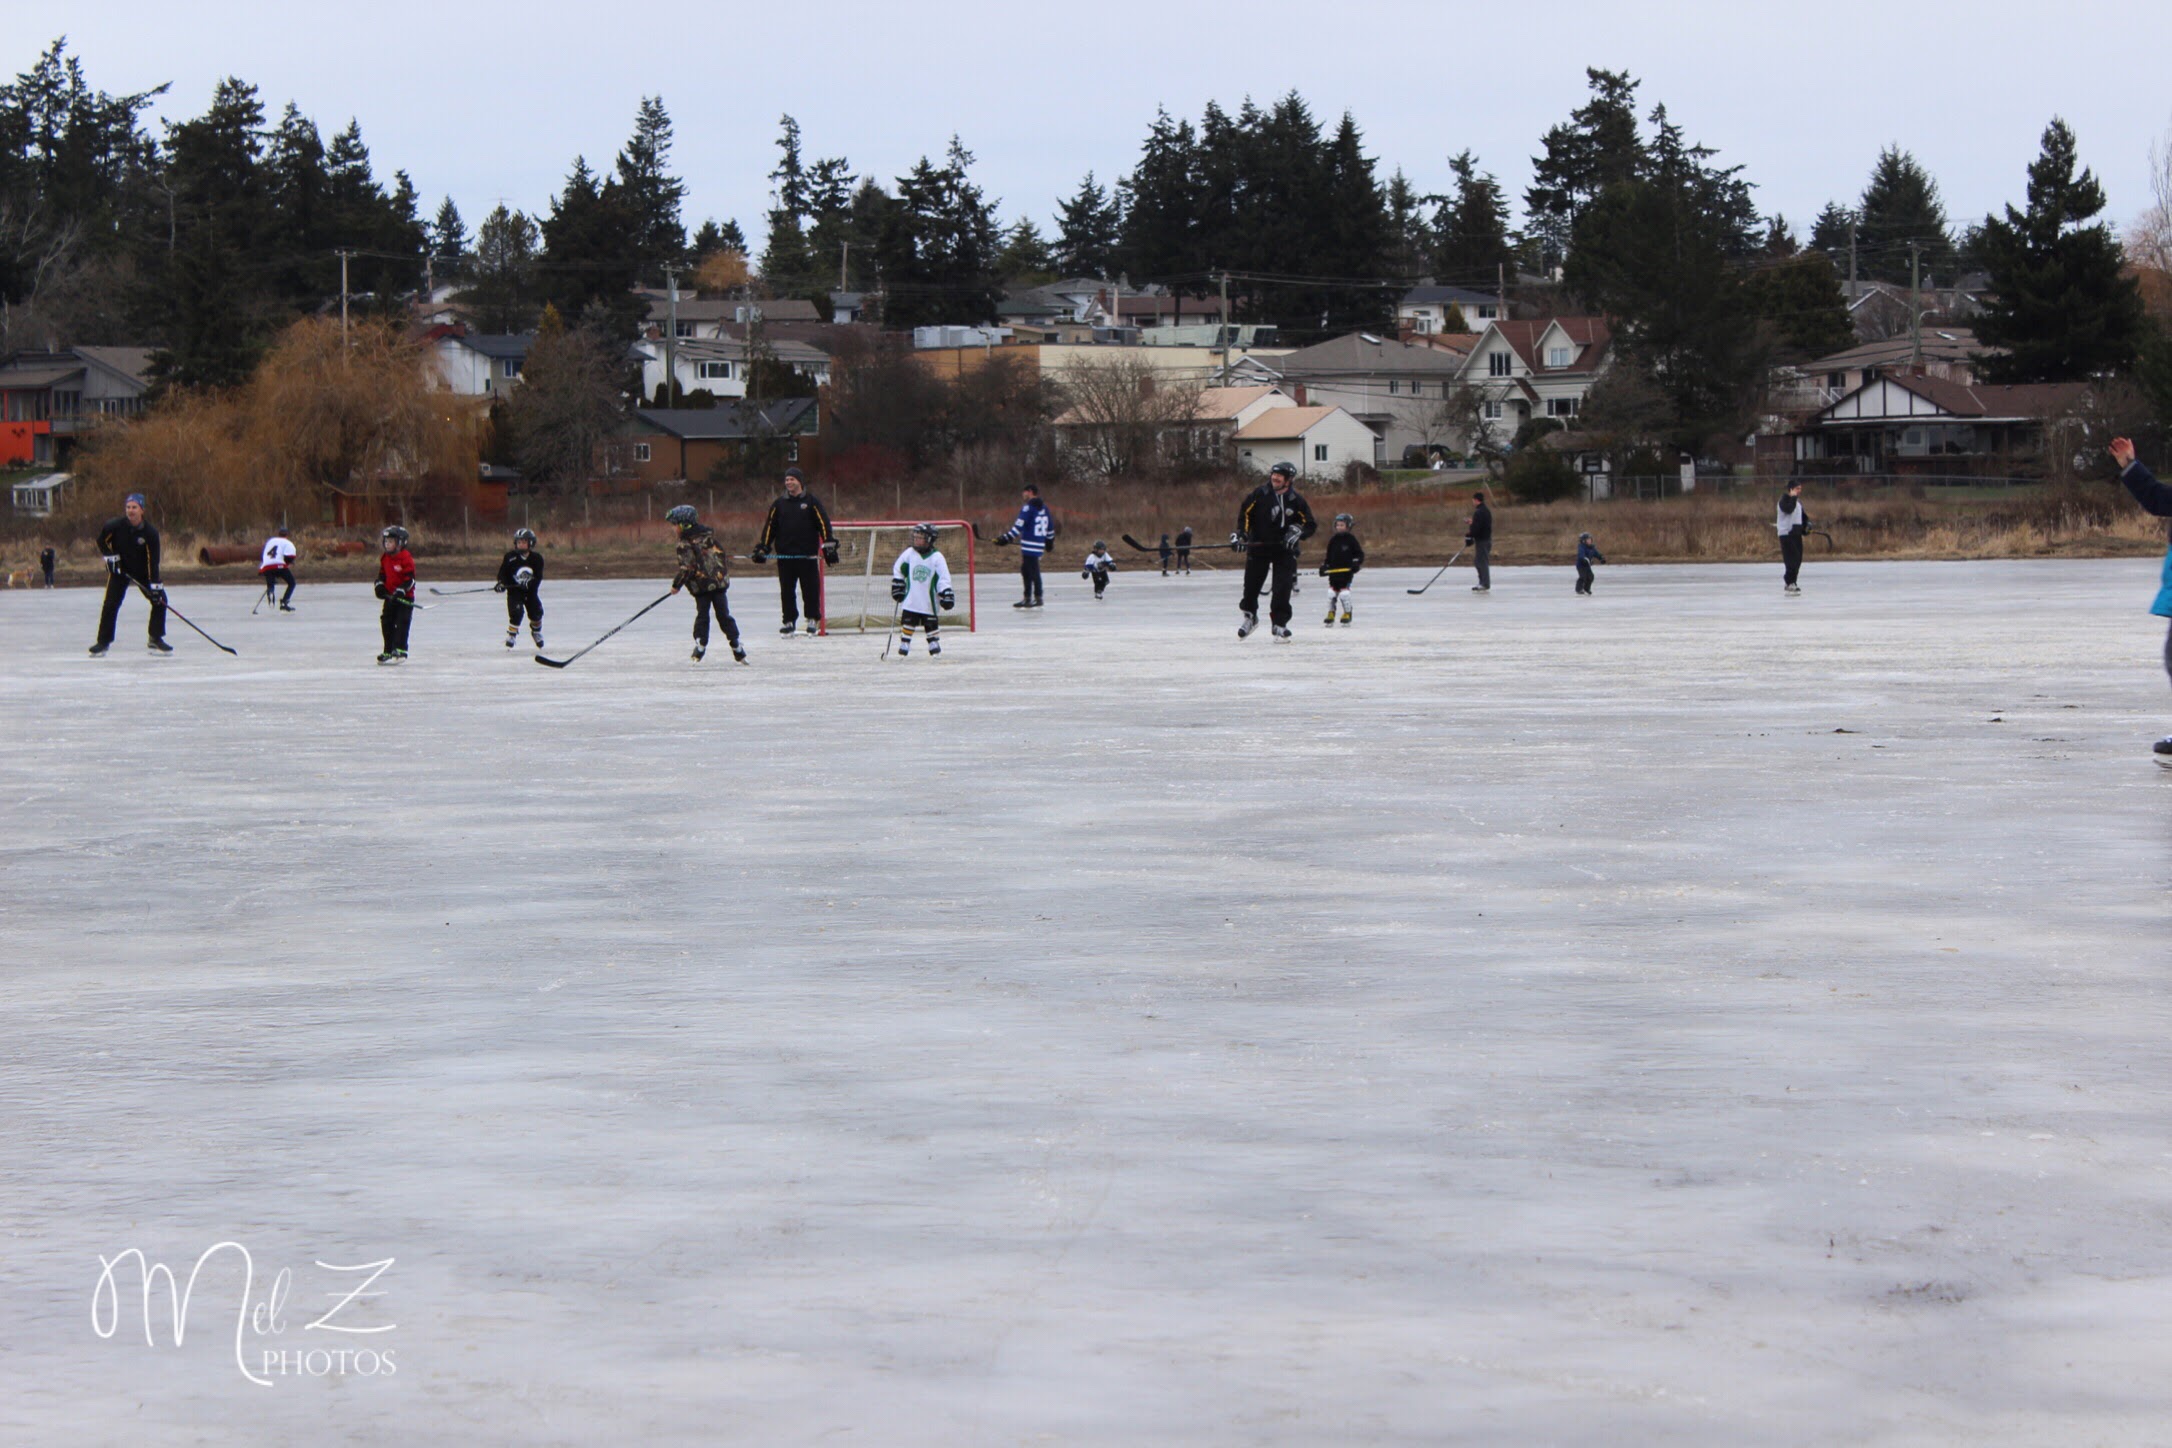 Pond Hockey and Frozen Ponds....This is Victoria? (Photos) - Ocean 98.5